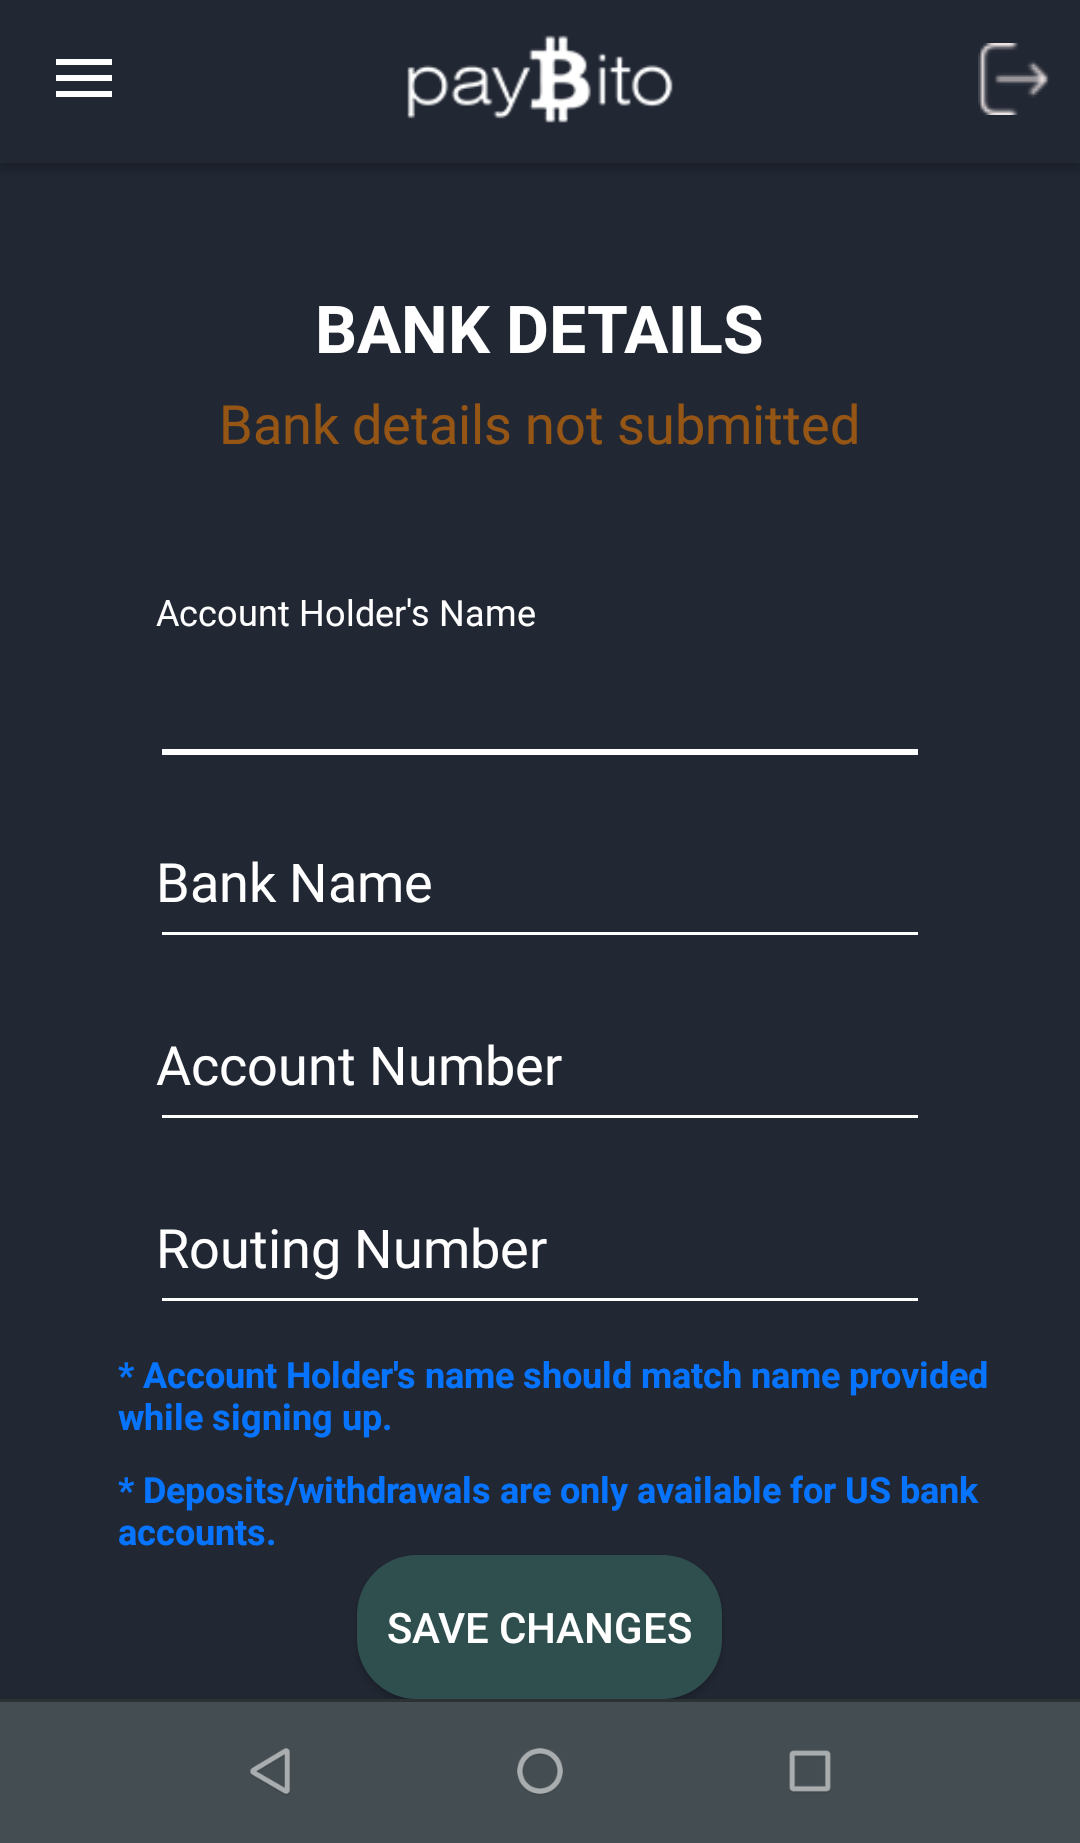 paybito app bank details